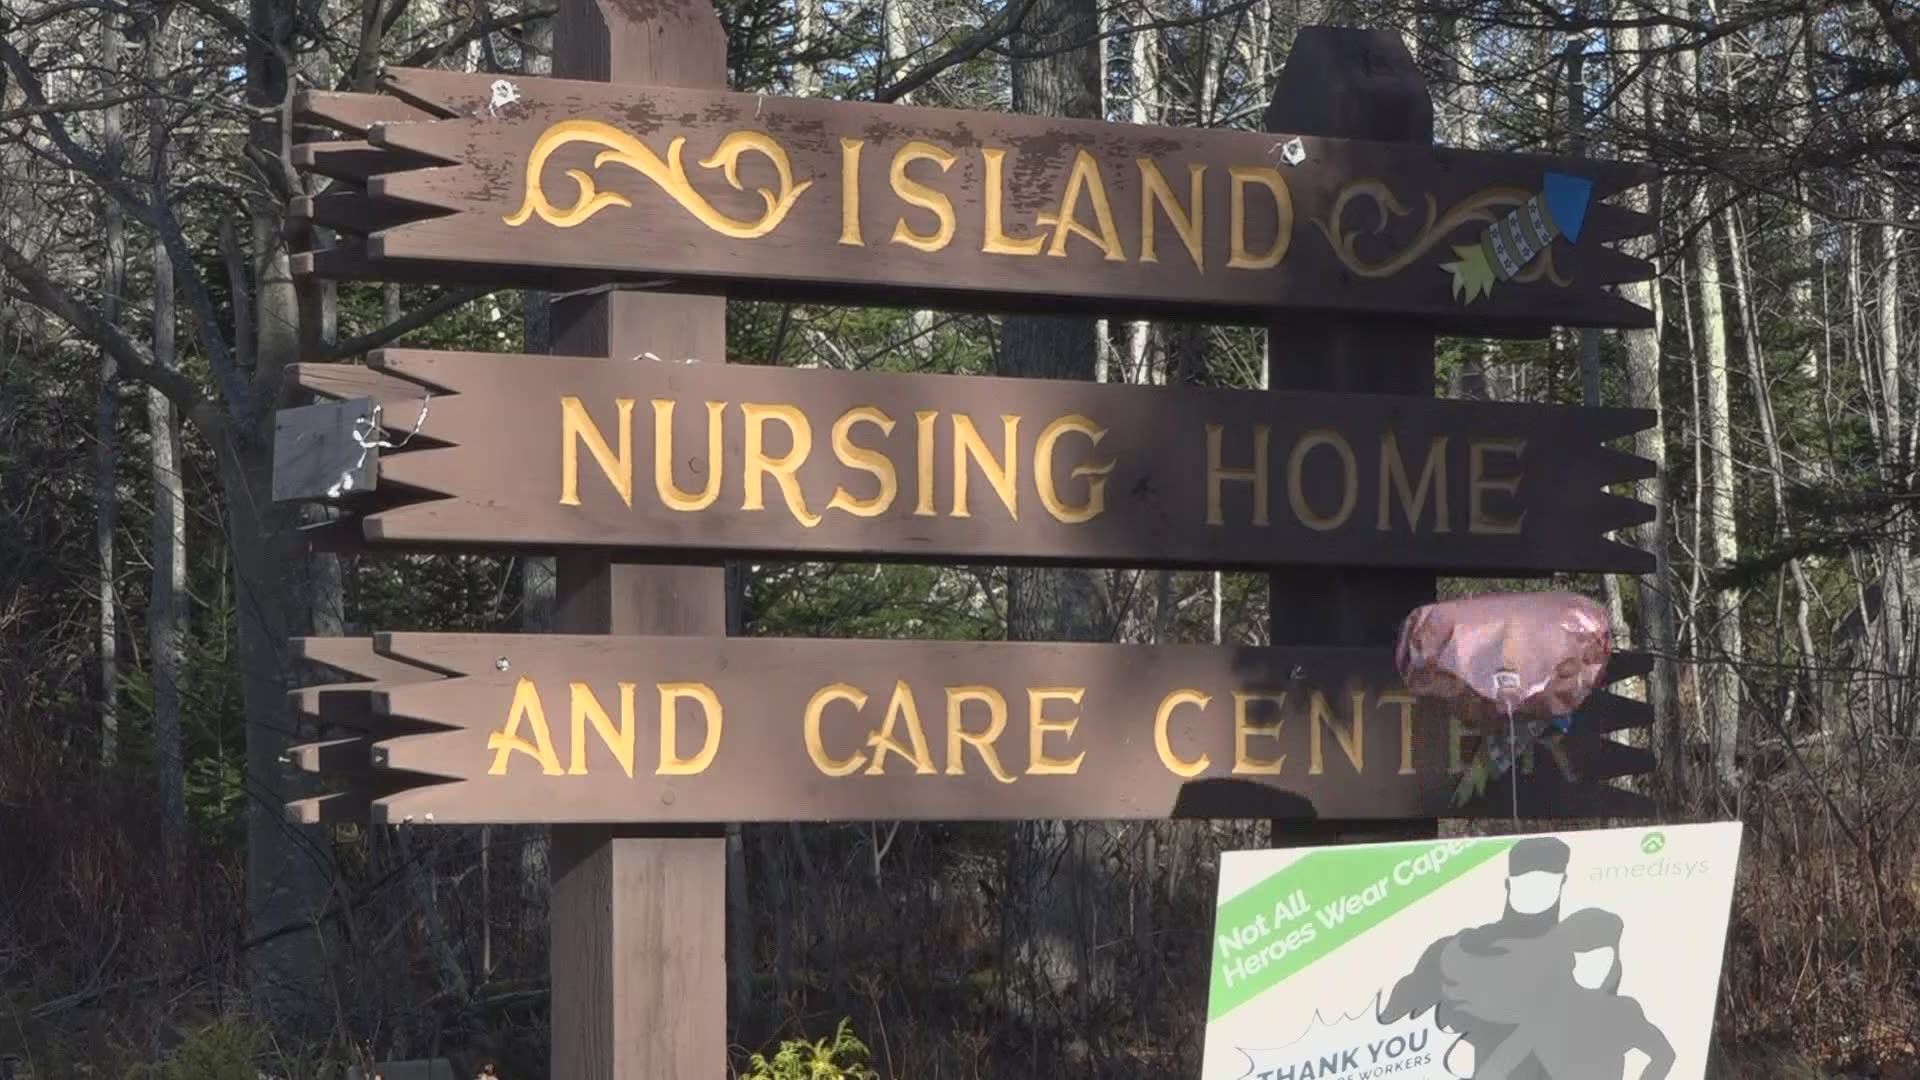 The CDC says "Island Nursing Home and Care Center" in Deer Isle has 52 cases of COVID-19. 35 residents and 17 staff members have tested positive.